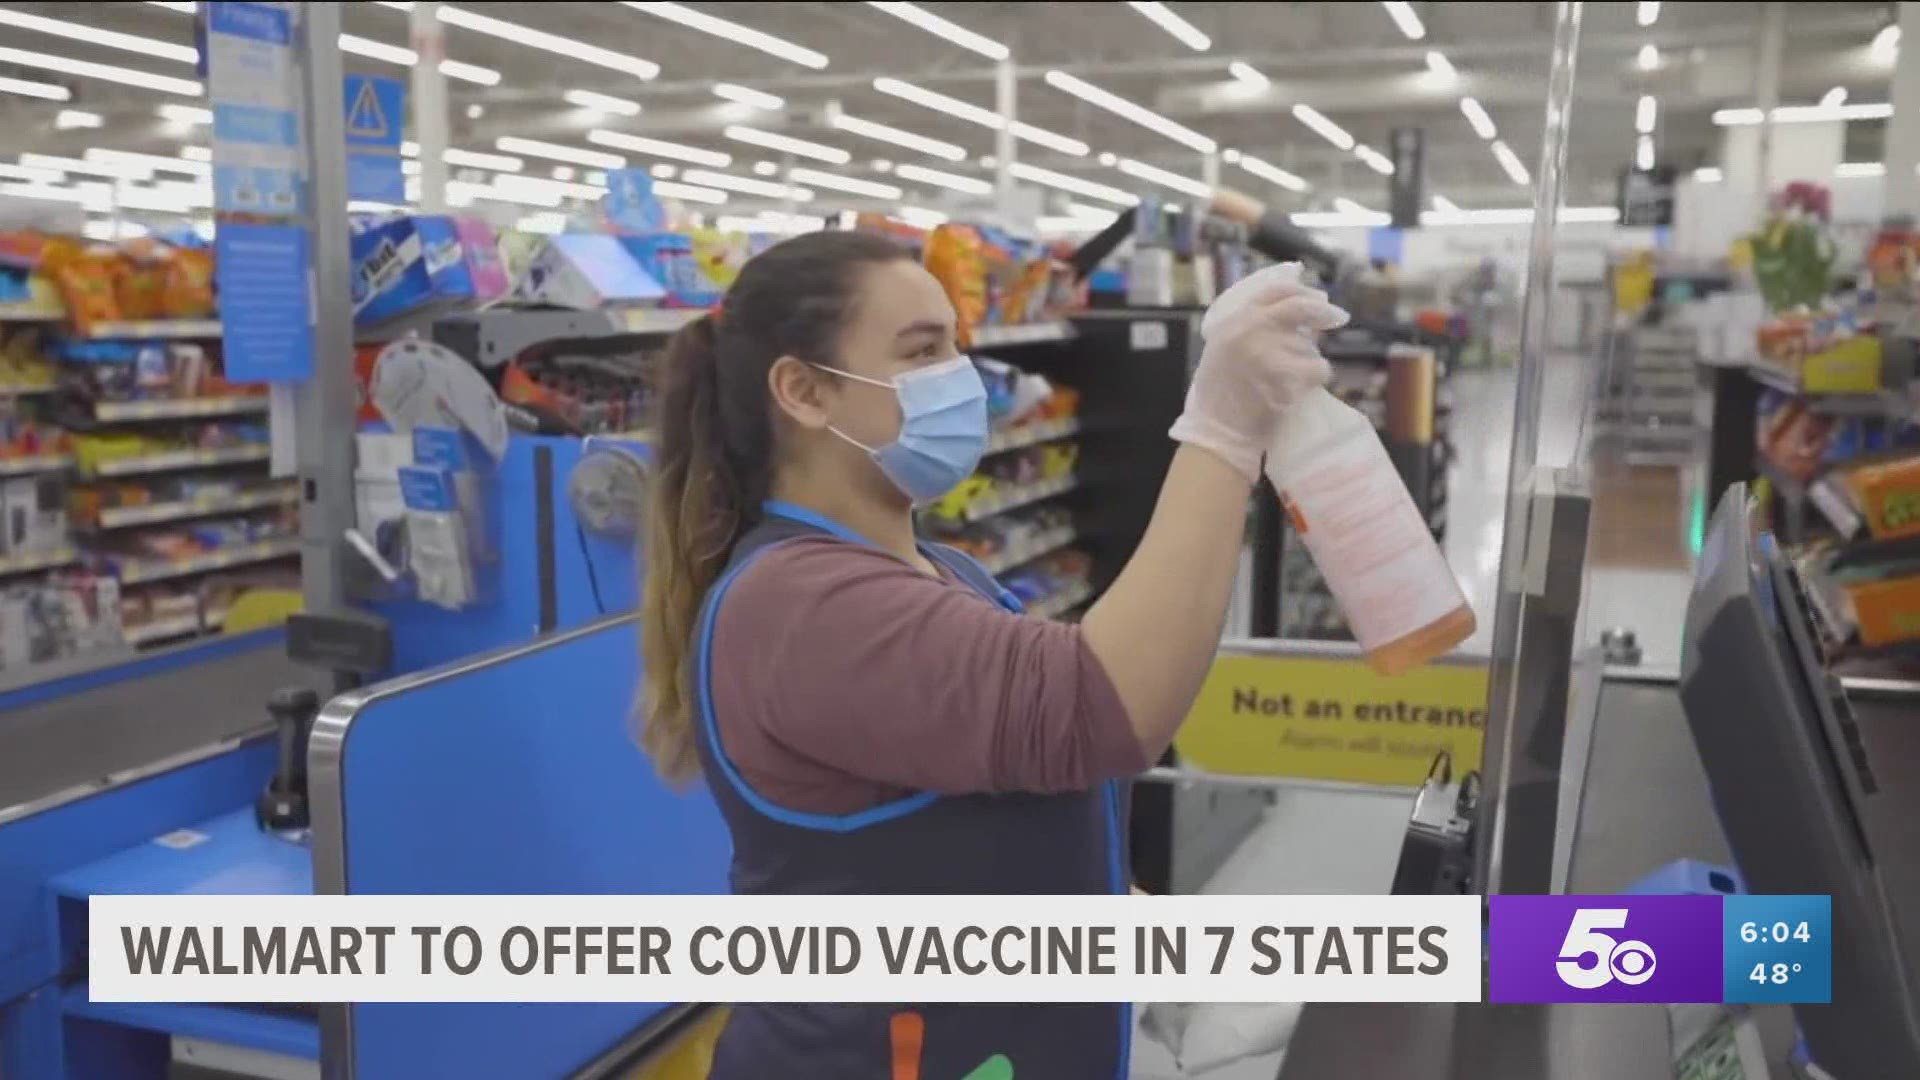 Walmart Pharmacies to offer Covid-19 vaccine in 7 states